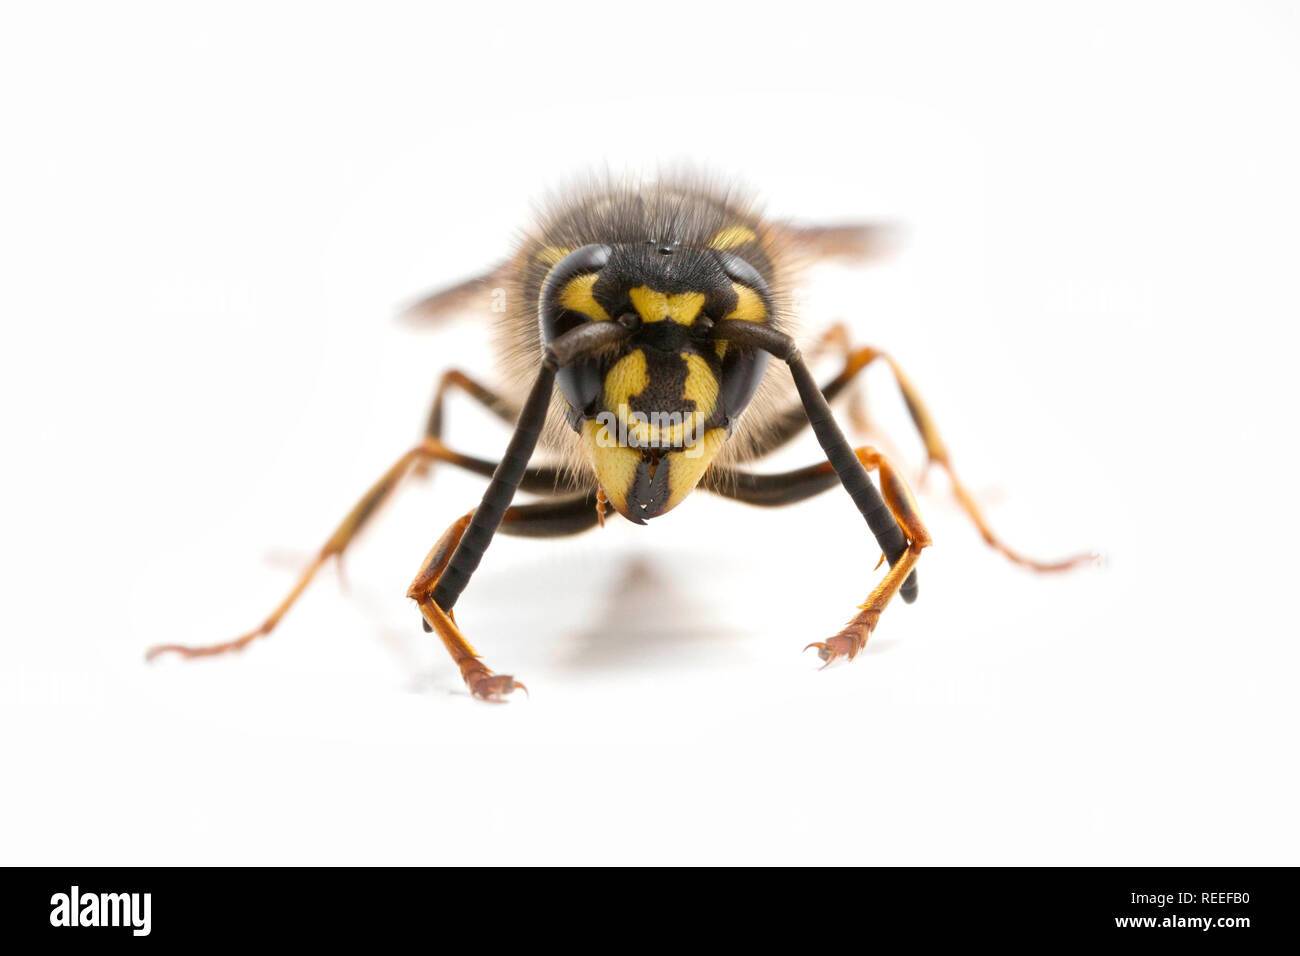 A common wasp, Vespula vulgaris, preening its antennae, photographed in a studio on a white background. Dorset England UK GB Stock Photo